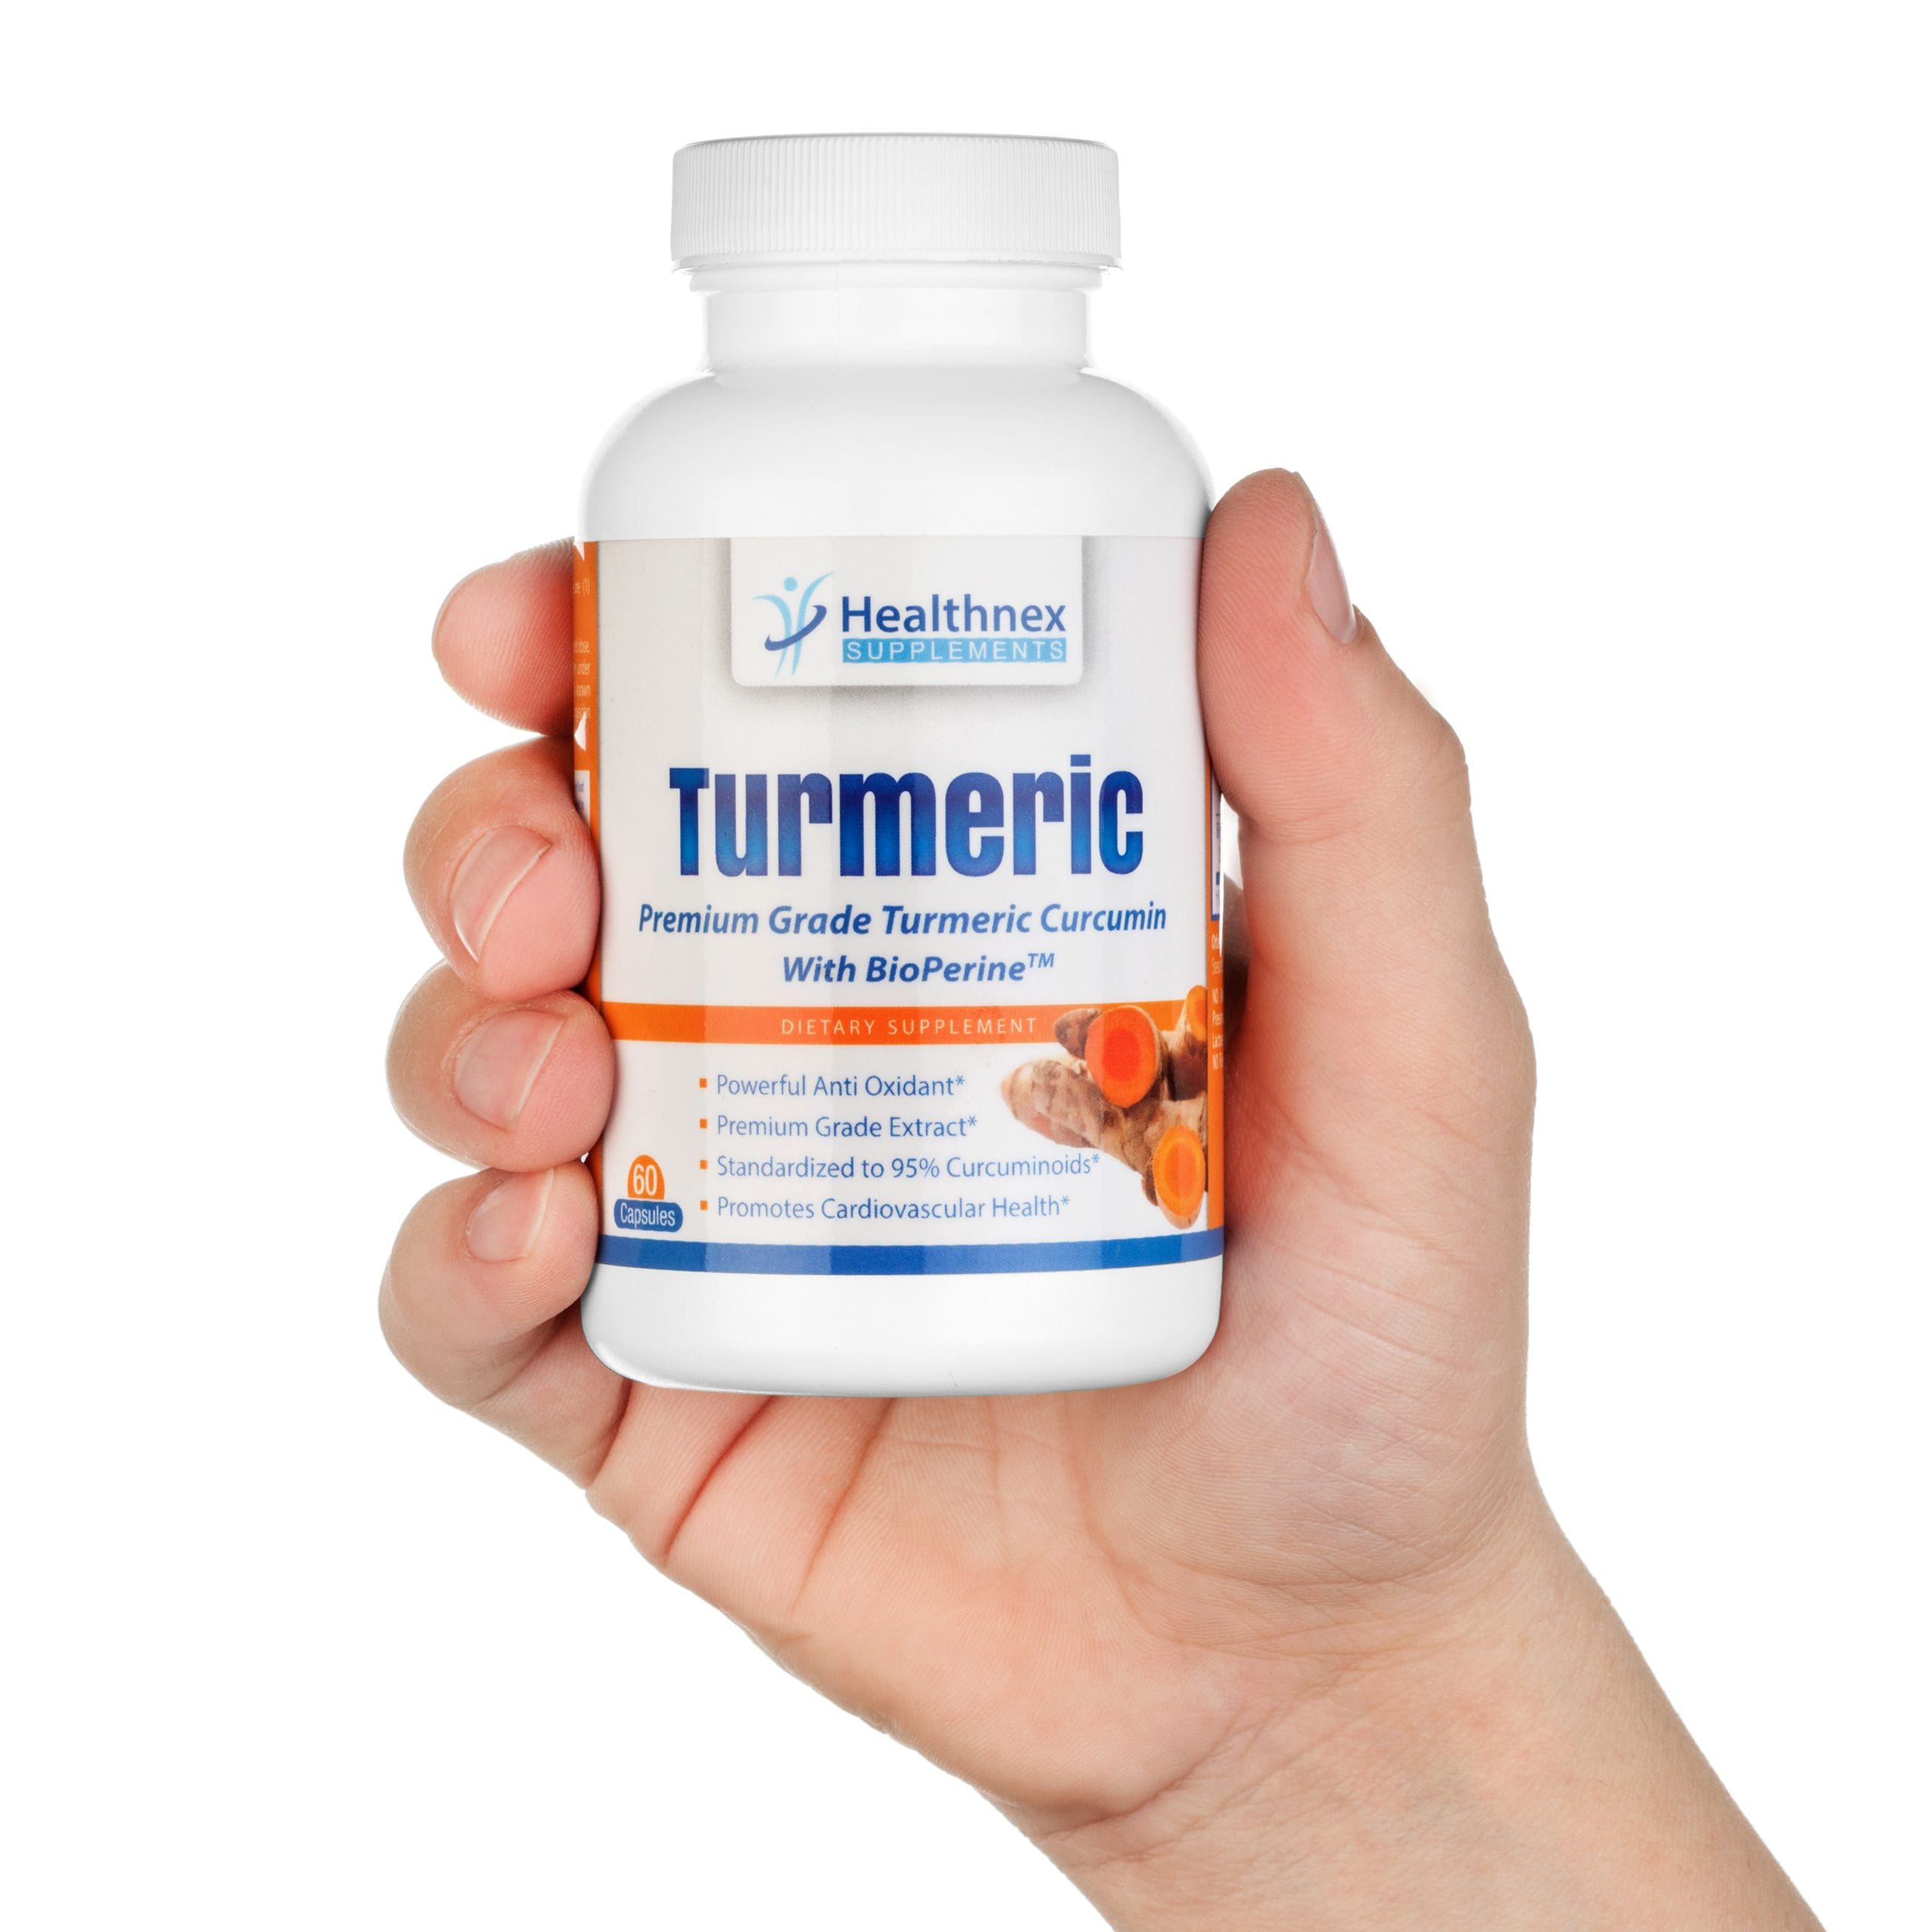 Professional photo of a hand model holding a bottle of turmeric dietary supplement.